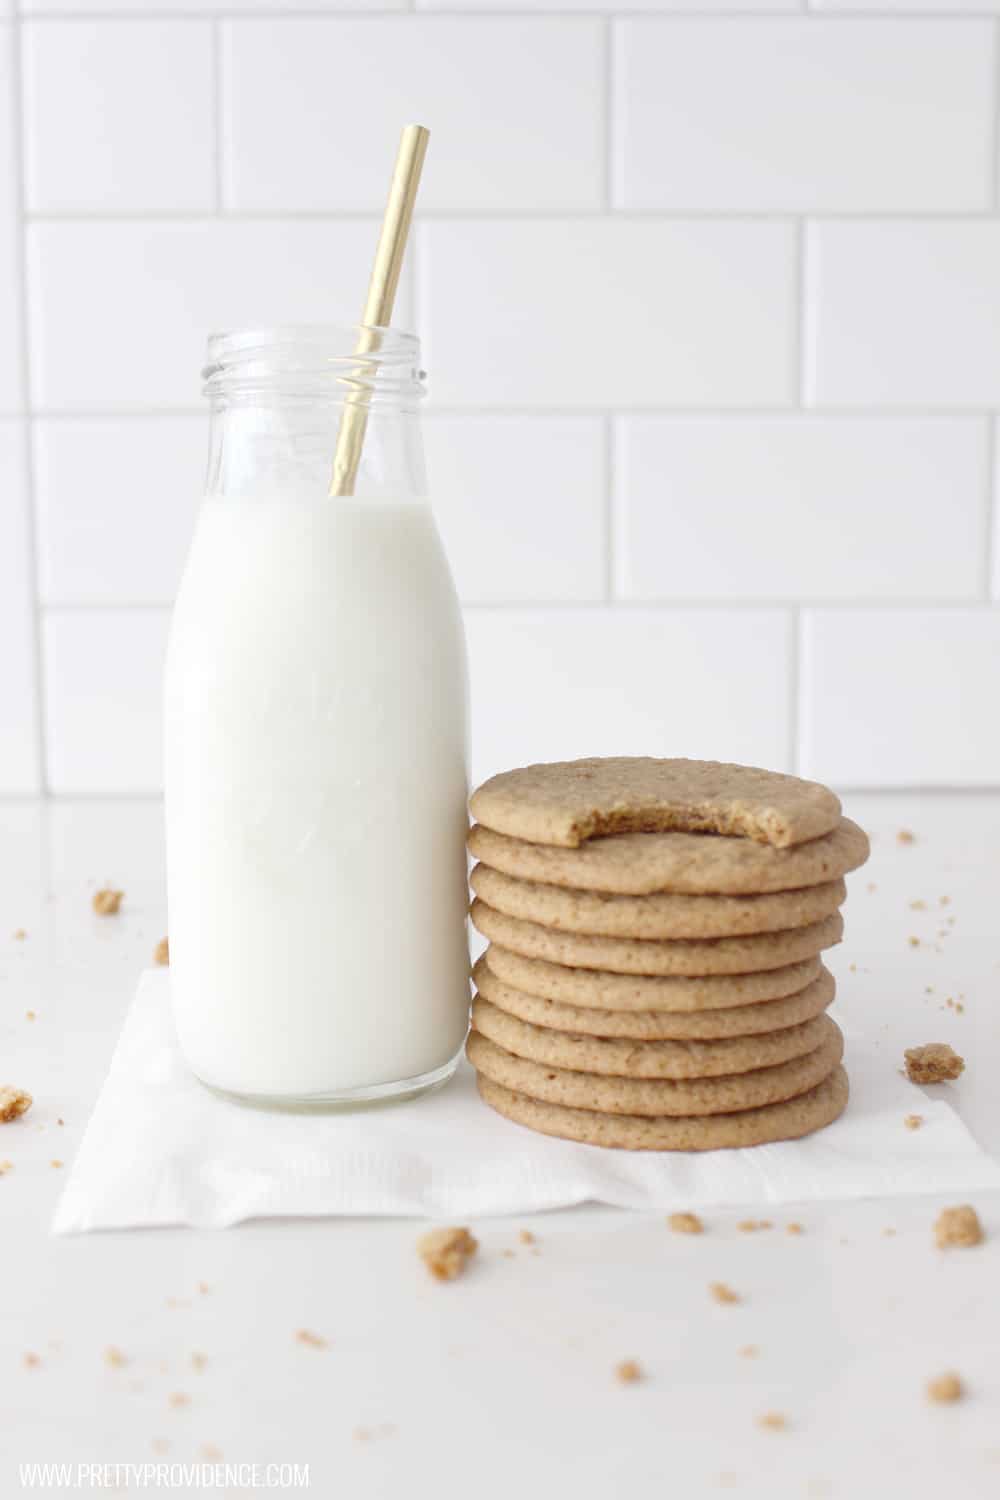 a stack of ginger snaps next to a milk glass with a gold straw and crumbs surrounding